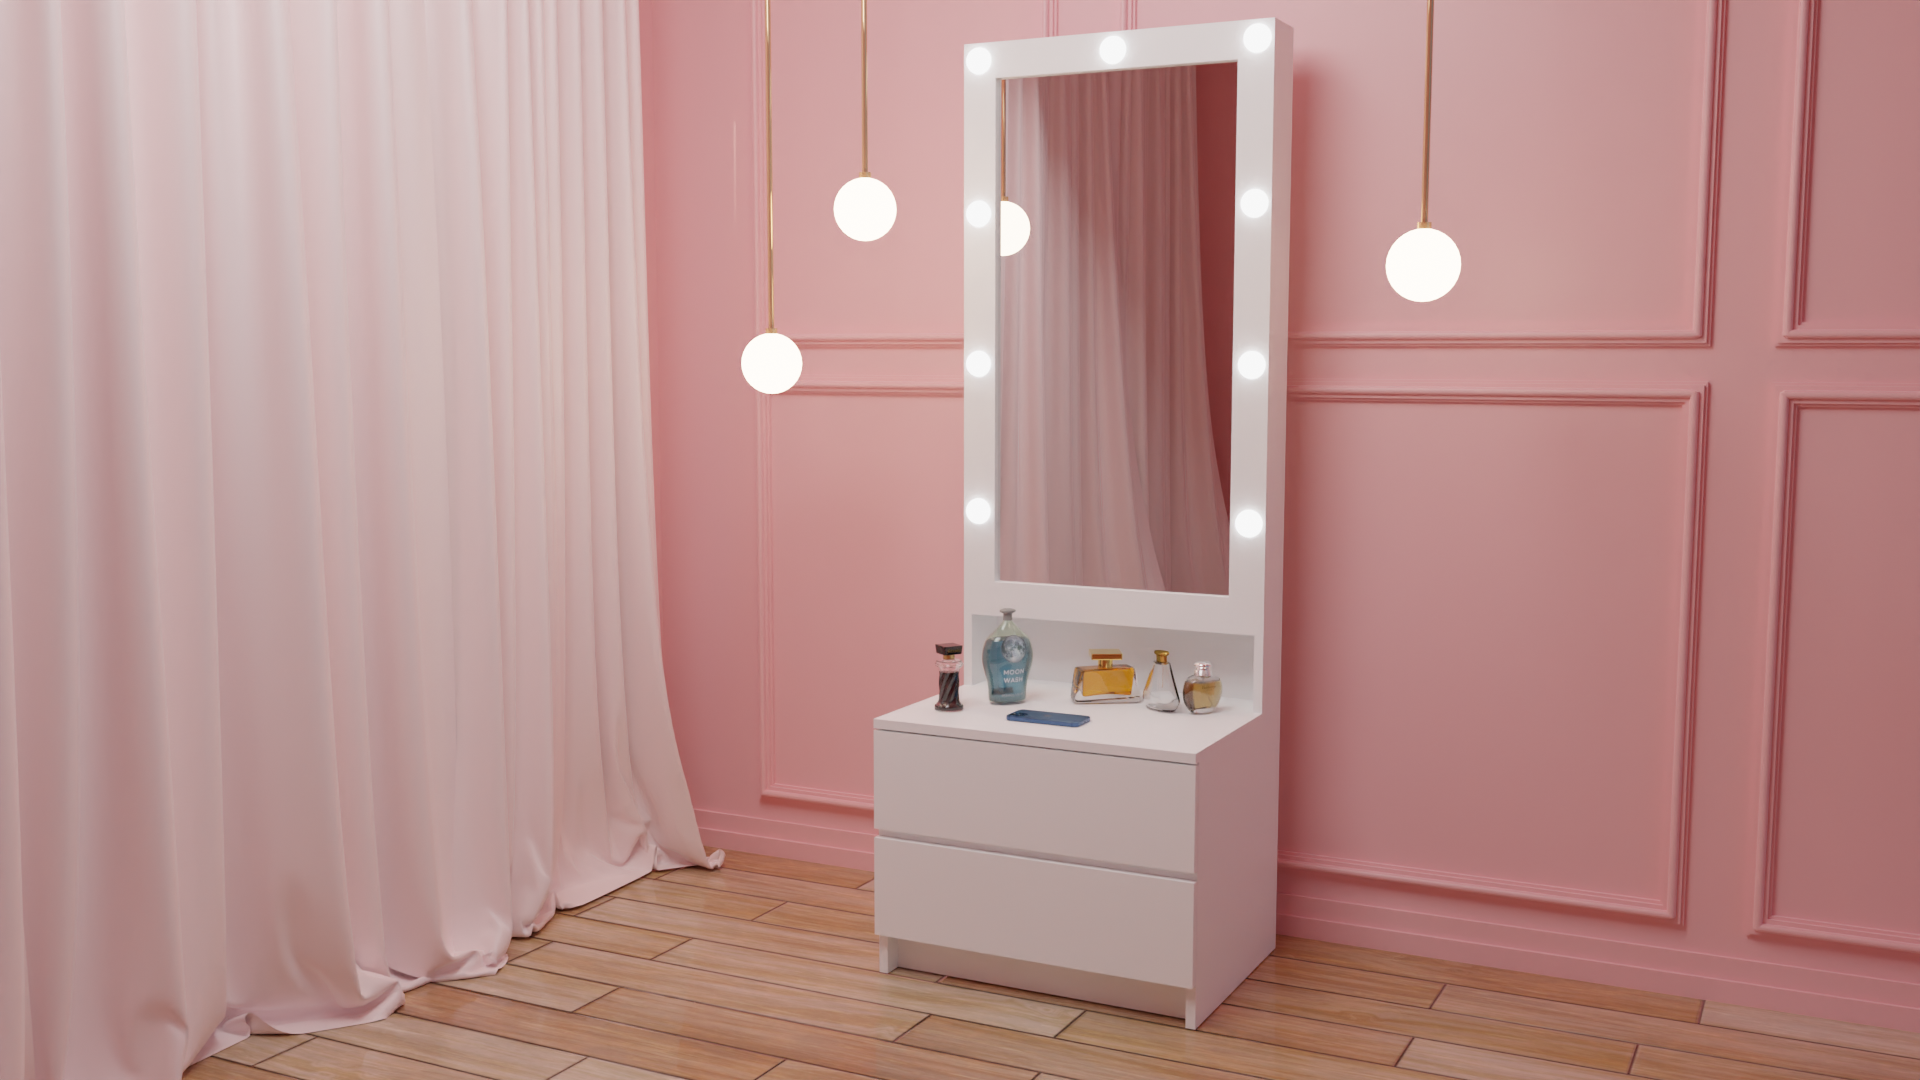 THE MAKEUP ICON | MAKEUP VANITY WITH LED LIGHTS - Omaara